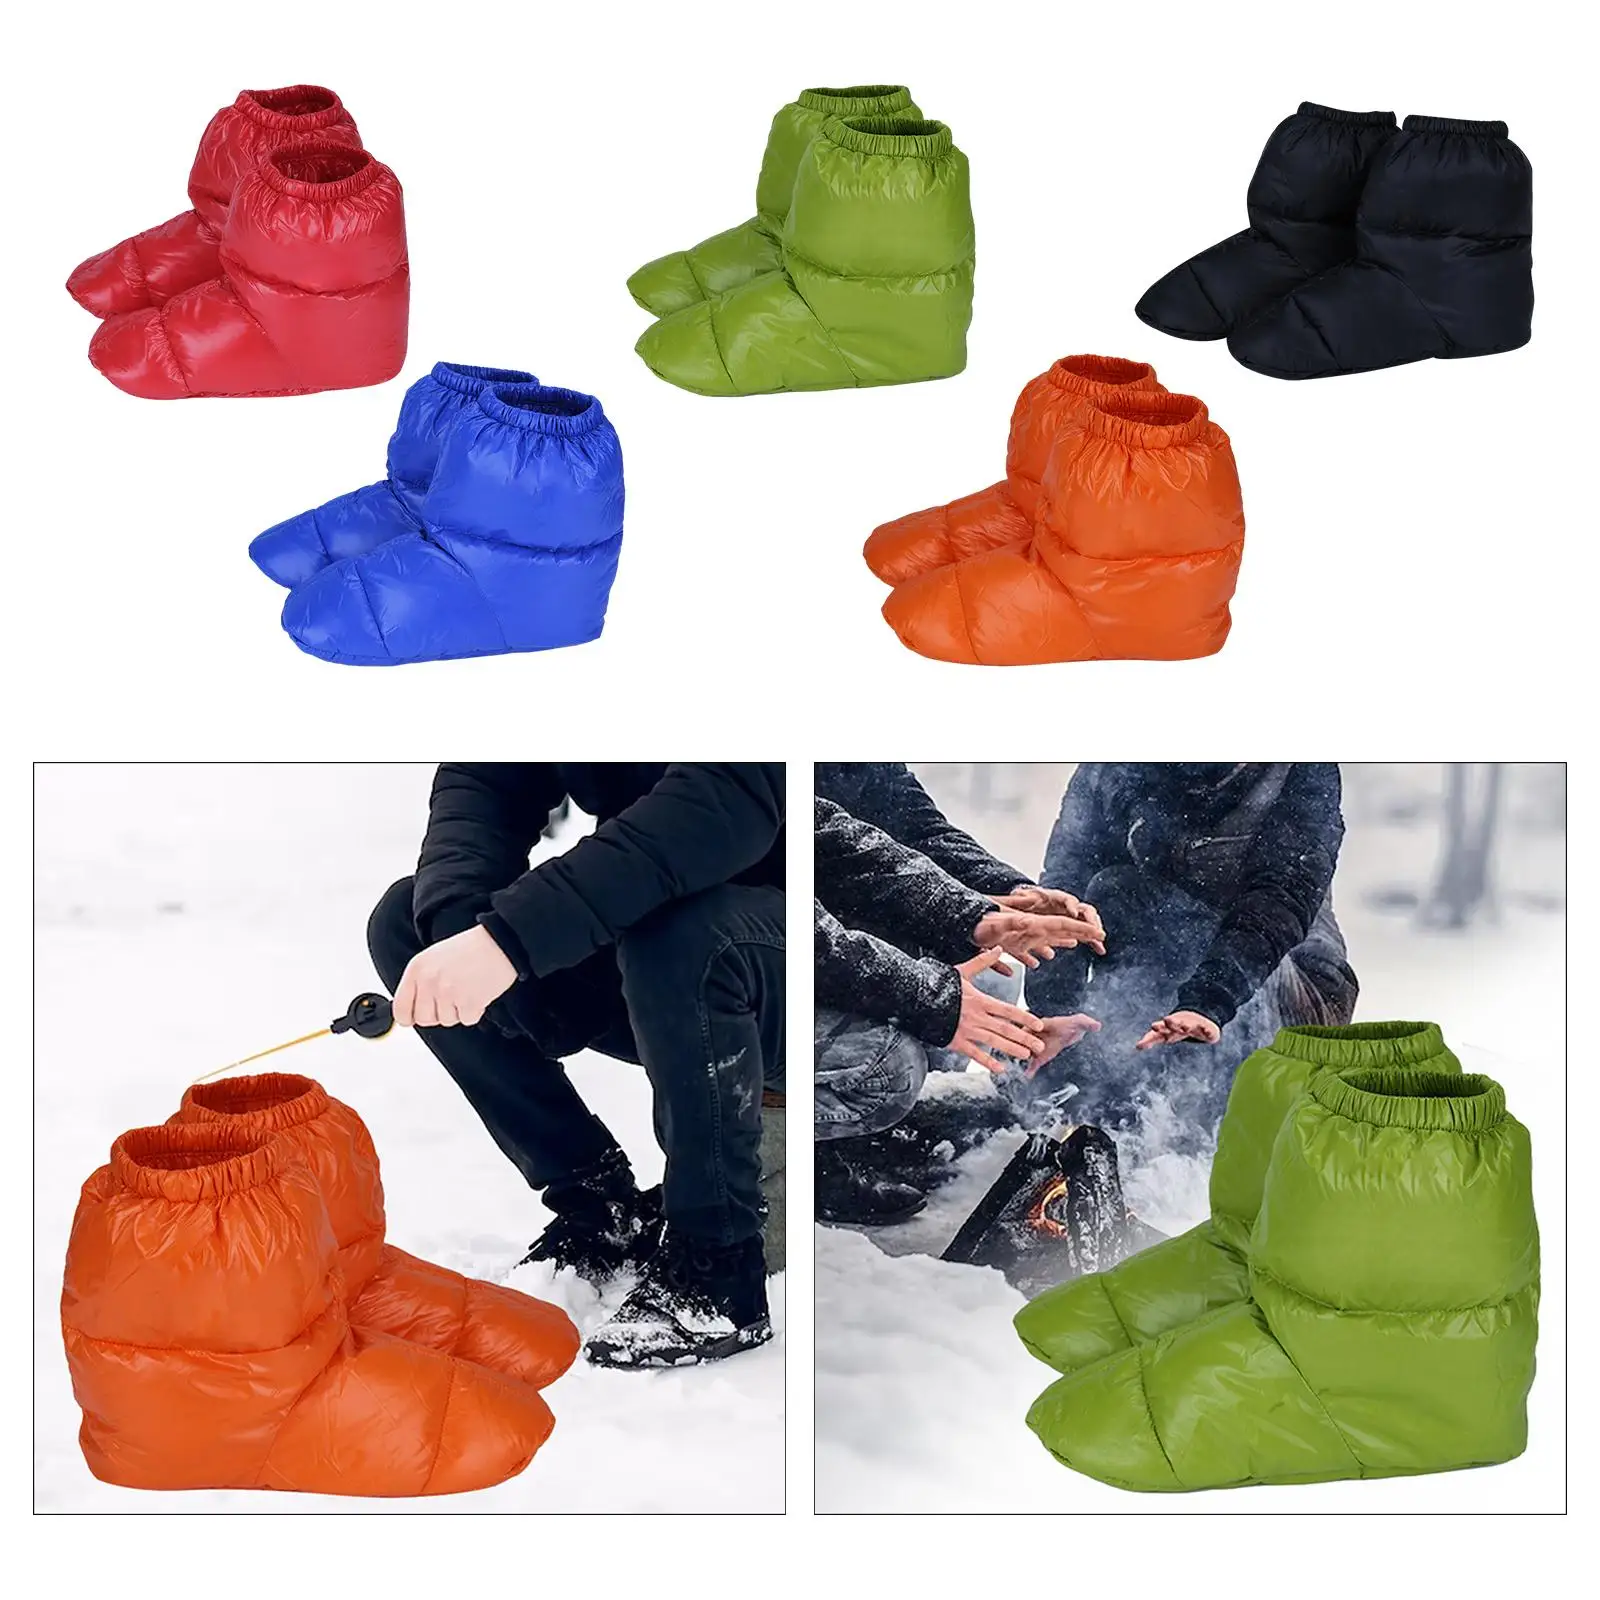 Winter Down Slippers Warm Bootie Shoes Keep Warm Lightweight Windproof Feet Cover Socks for Skiing Office Hiking Indoor Camping